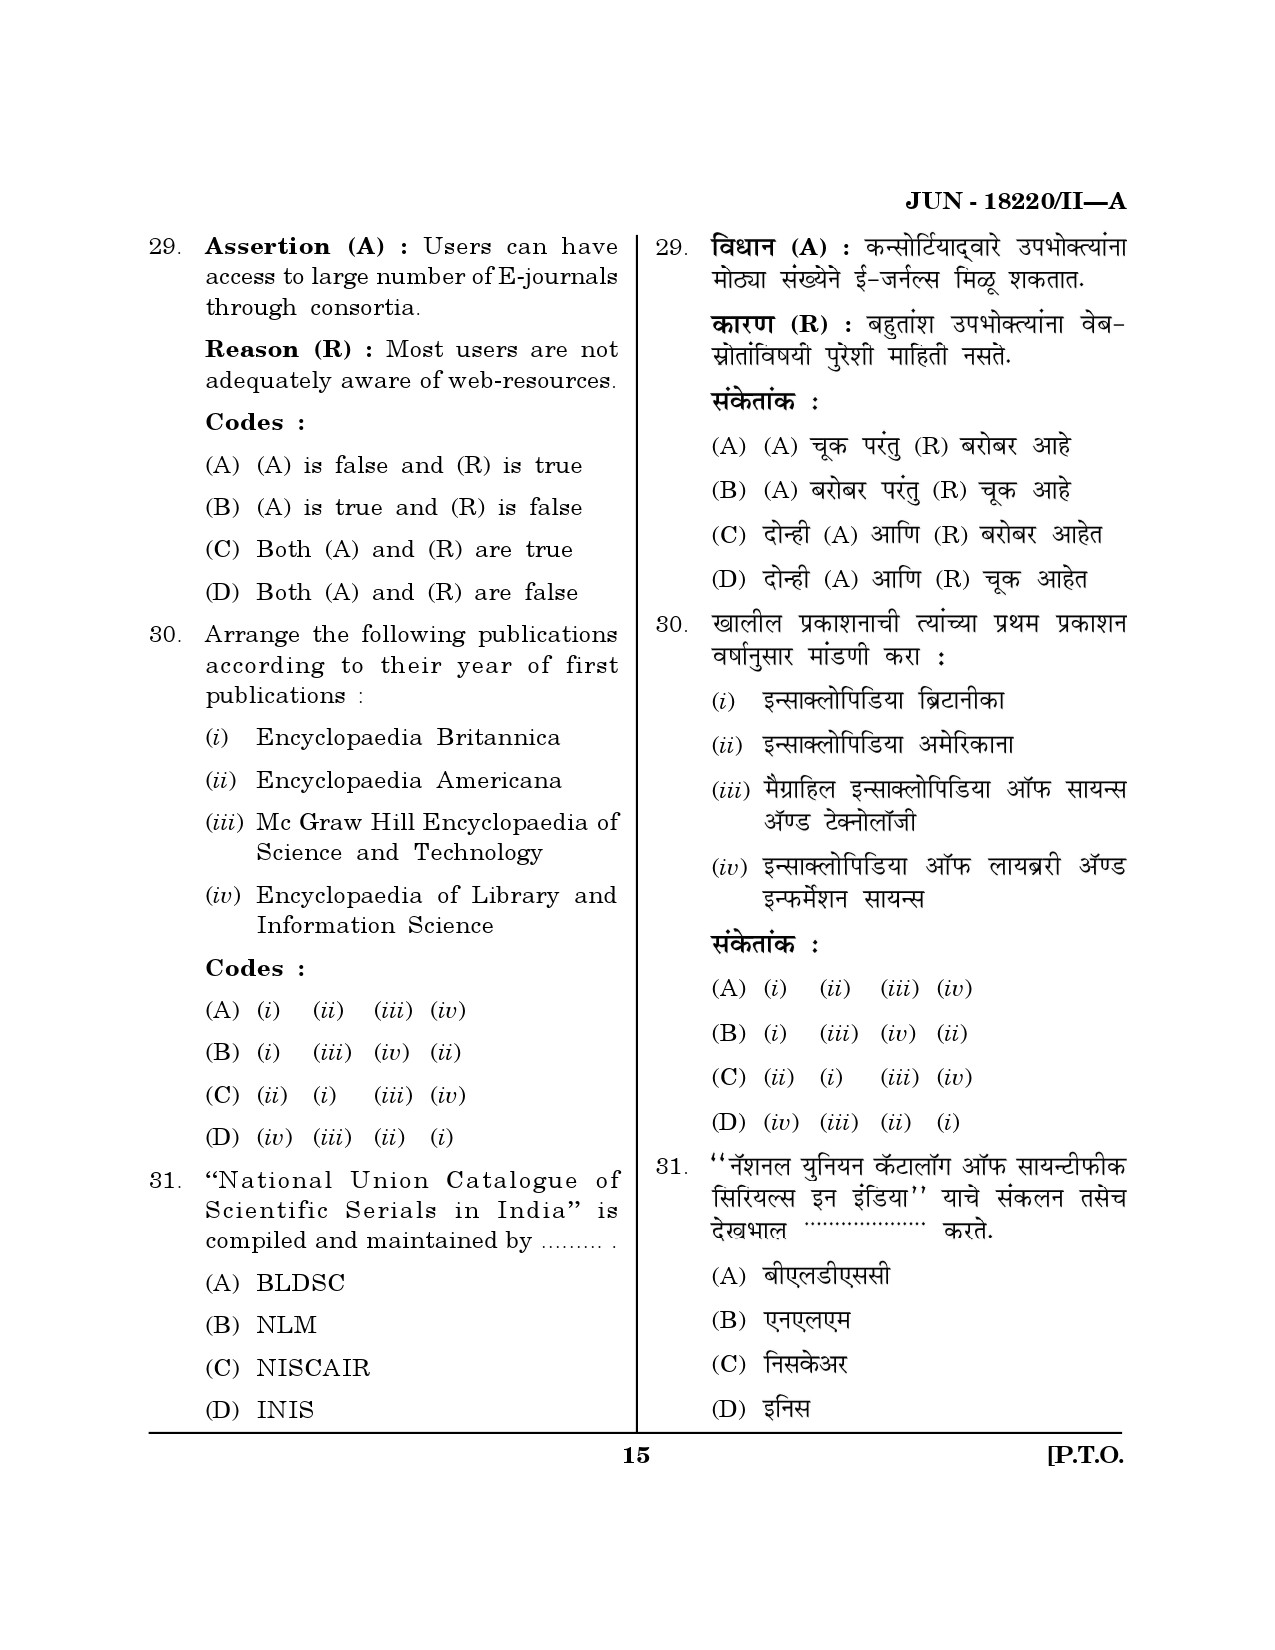 Maharashtra SET Library Information Science Question Paper II June 2020 14